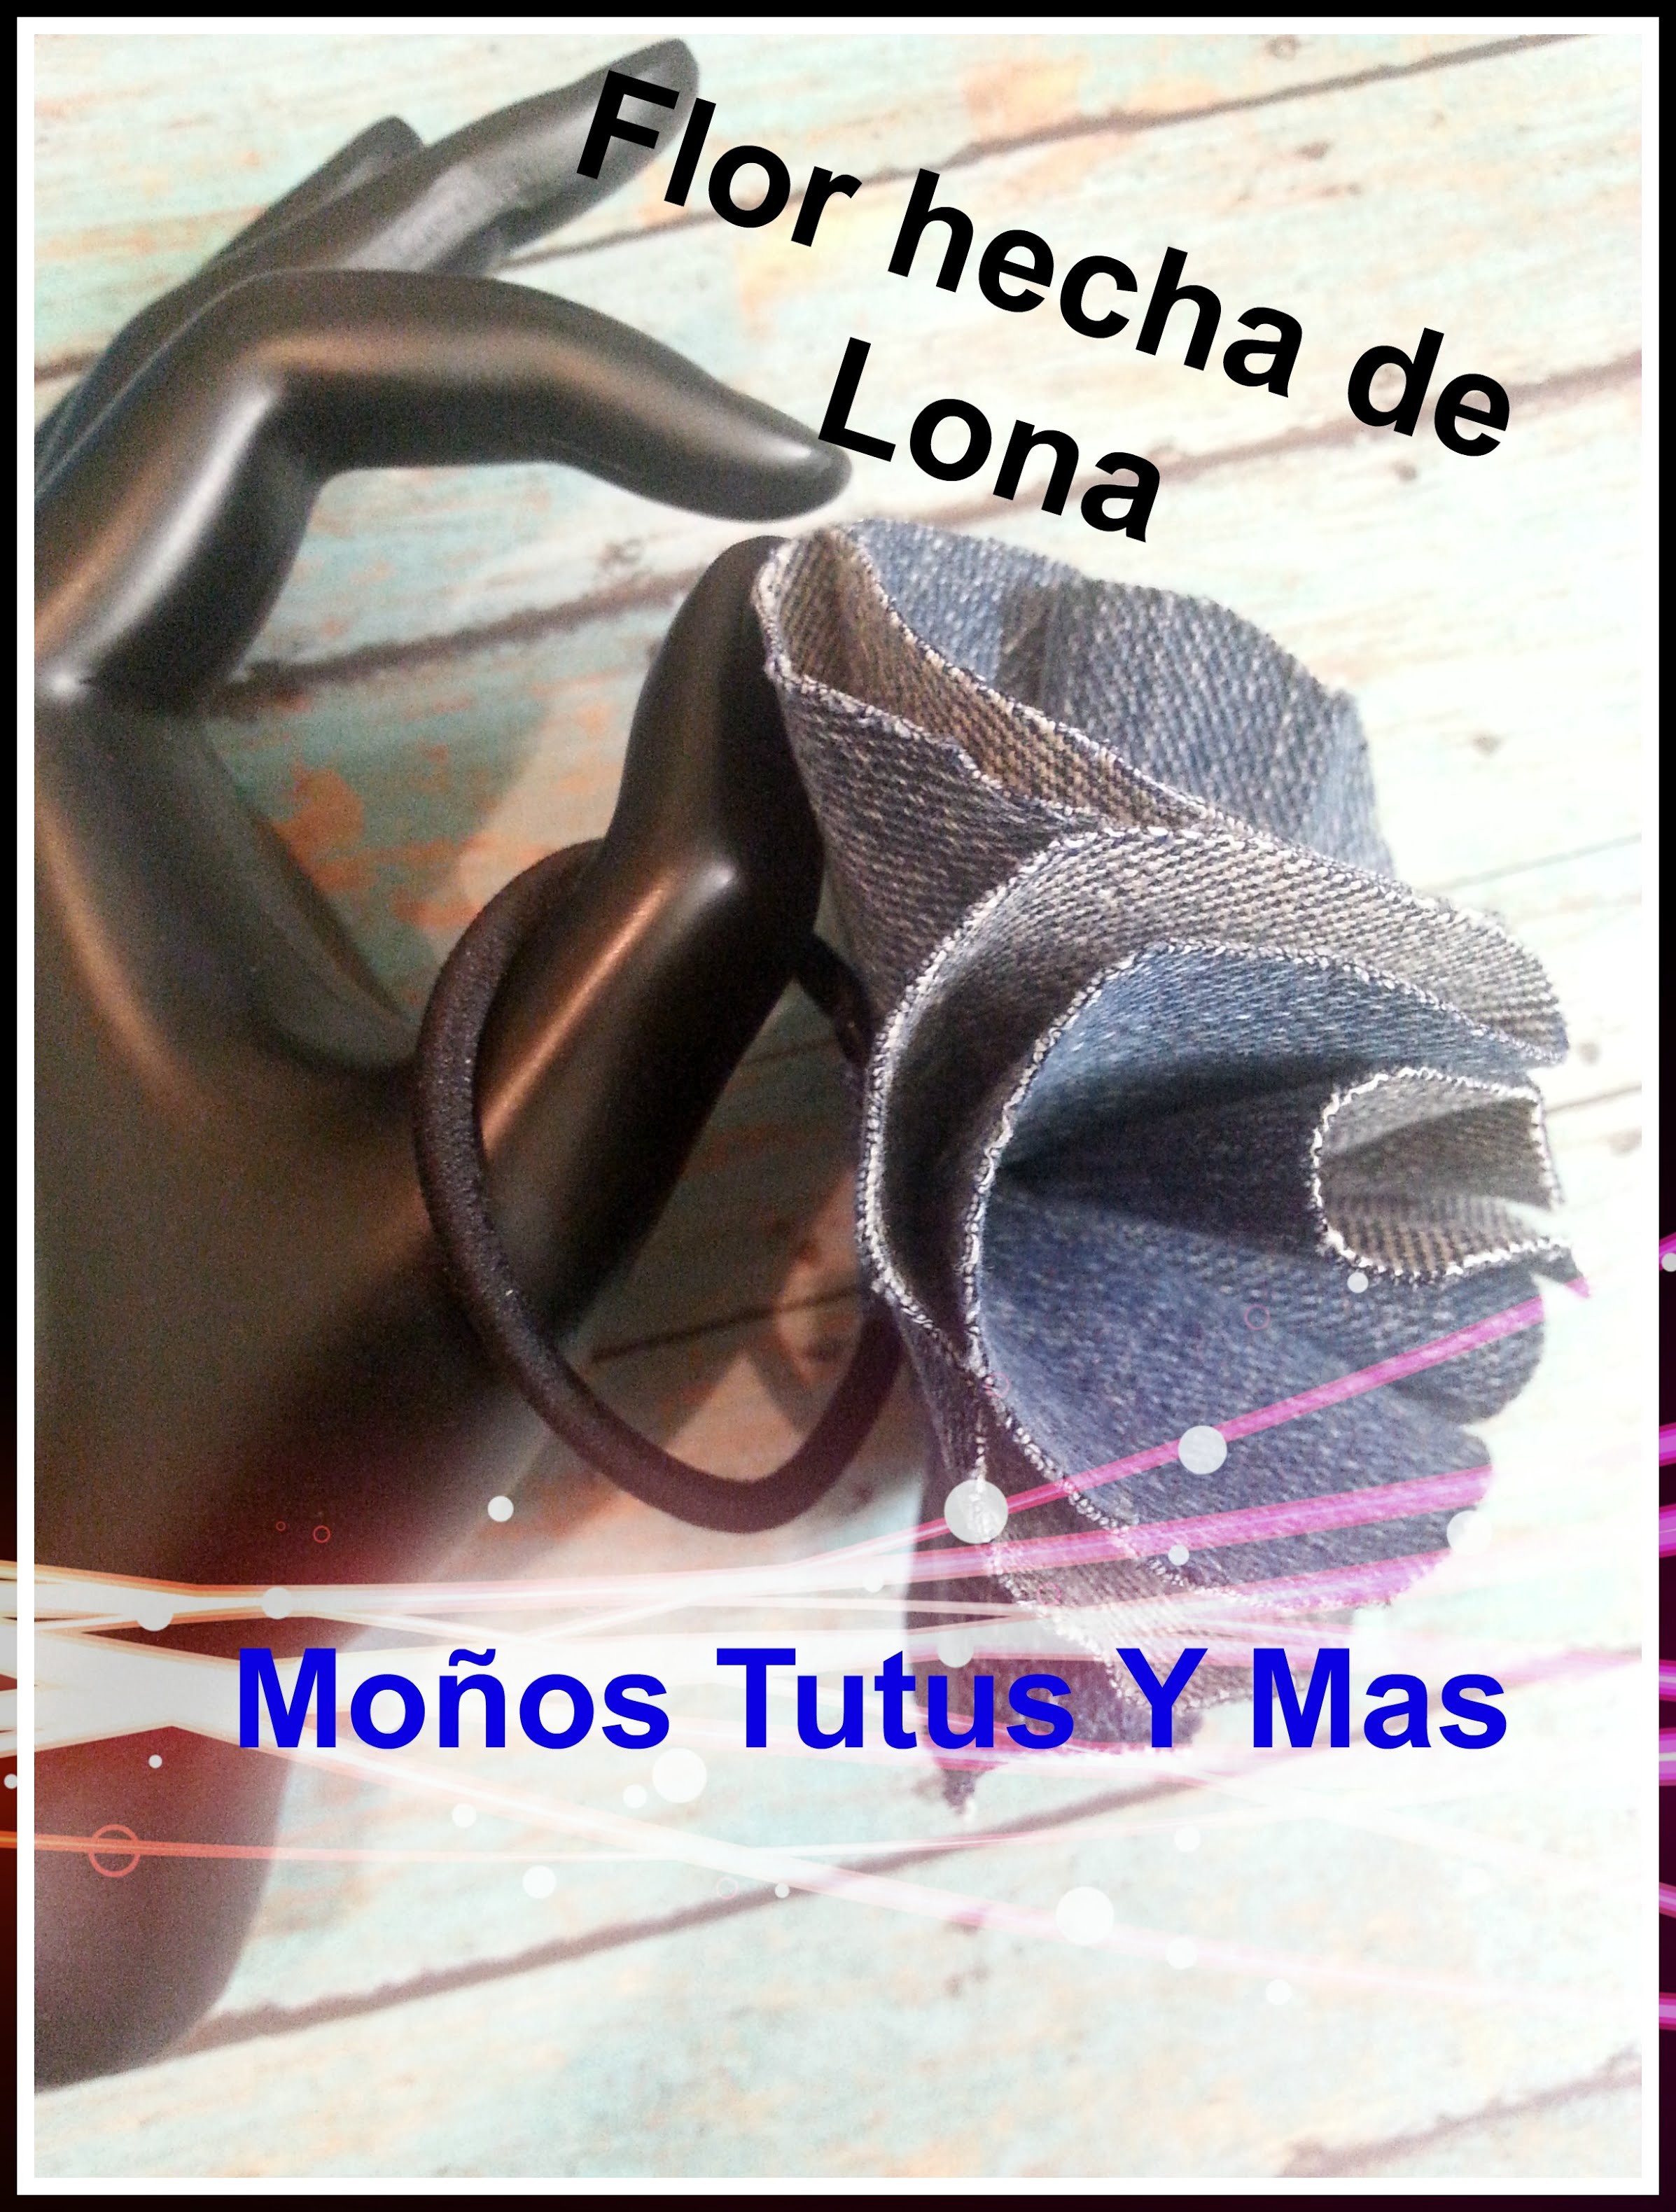 Flores Hechas con Pantalon de Lona FLOWERS MADE FROM JEANS Tutorial DIY How To PAP Paso a Paso